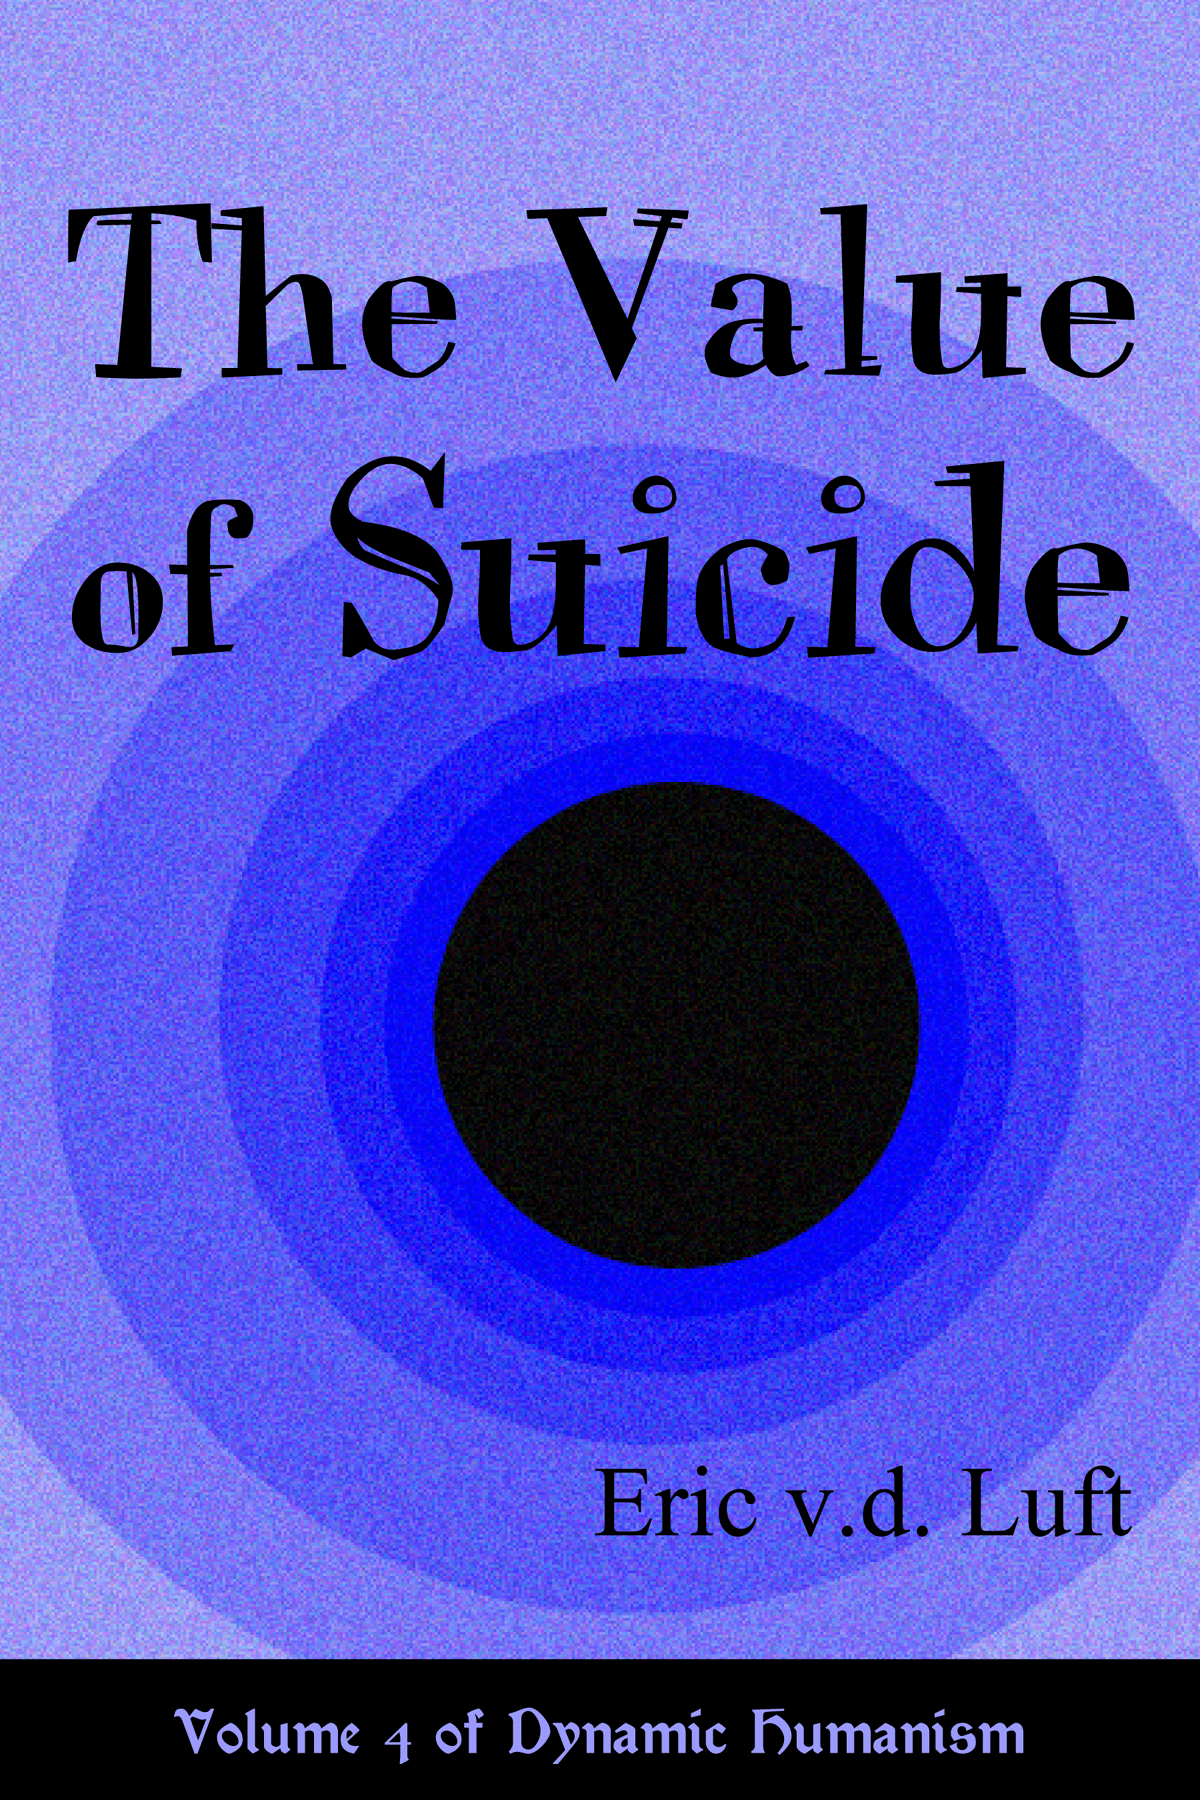 Dynamic Humanism, volume 4: The Value of Suicide by Eric v.d. Luft